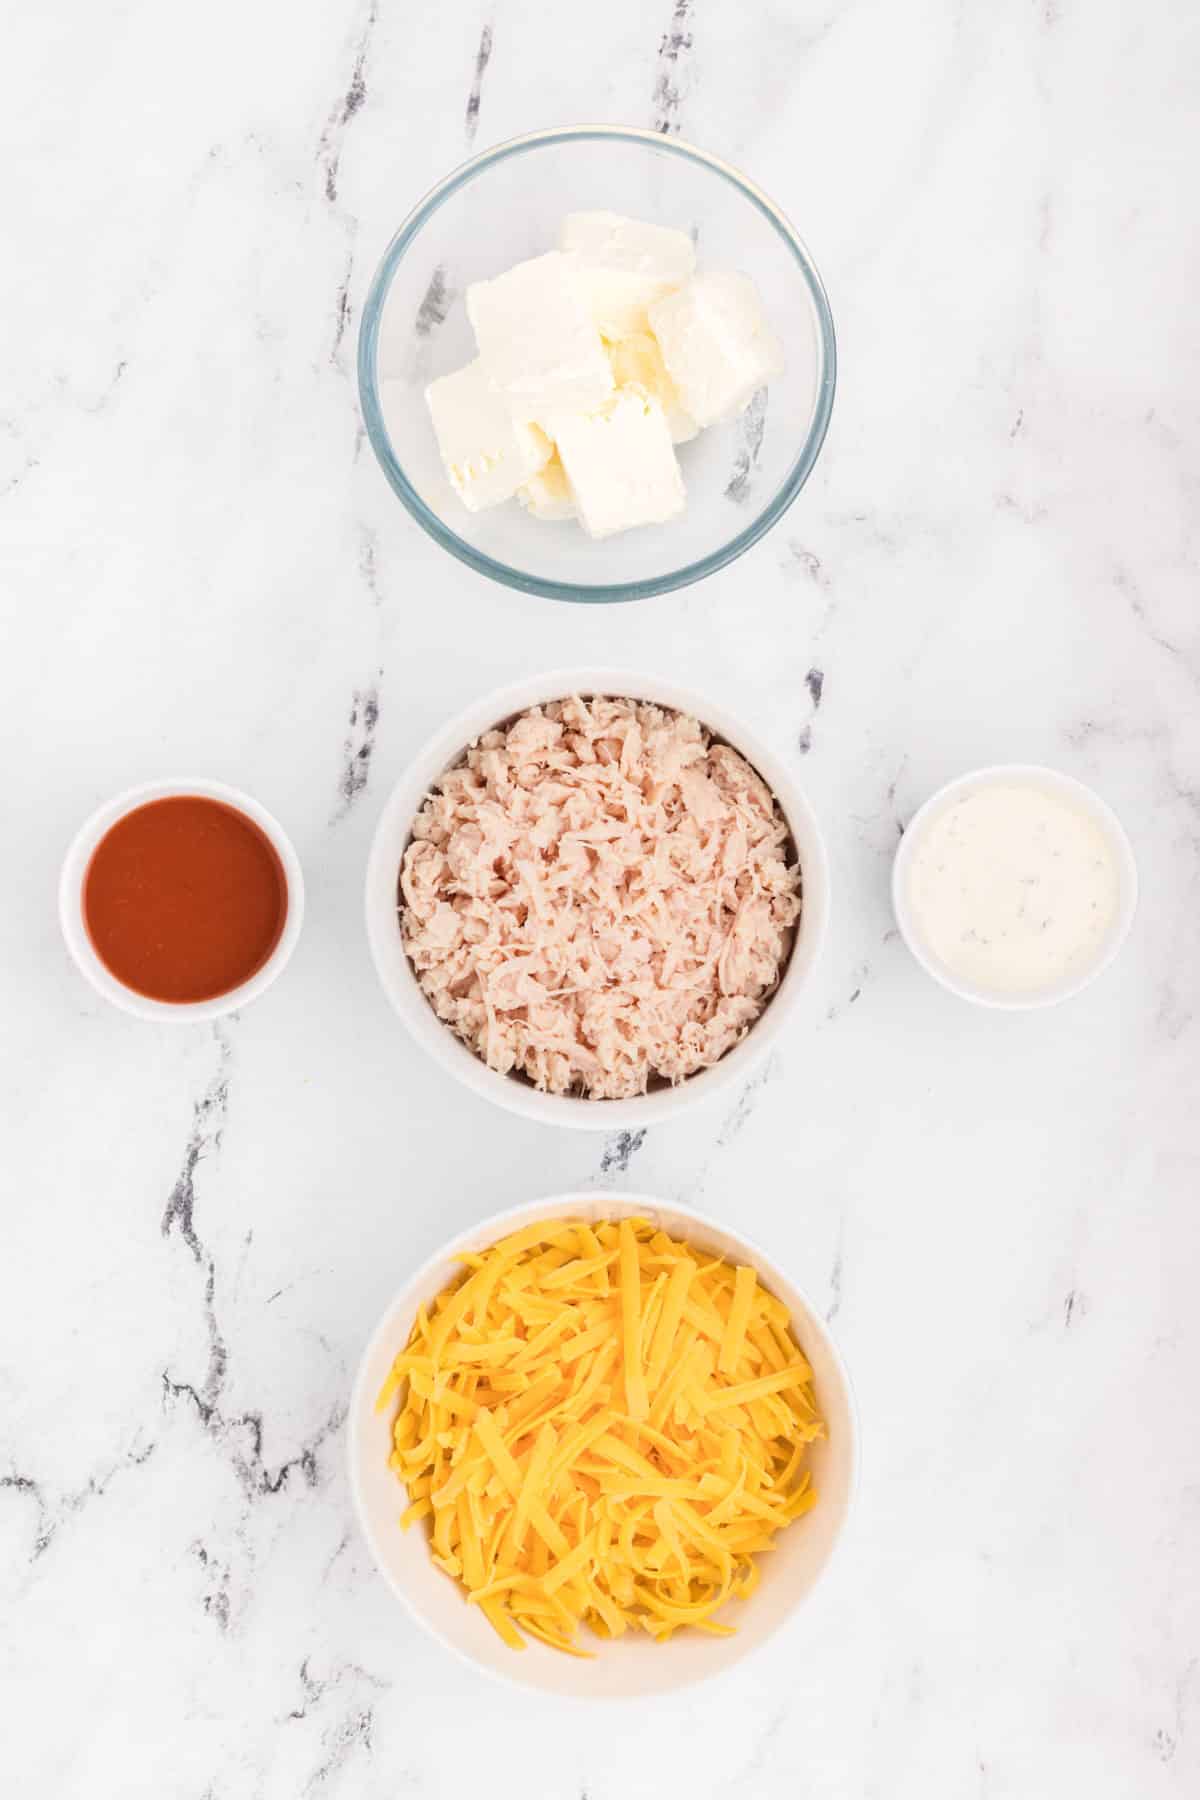 The ingredients for a cheesy rice dish on a marble countertop.